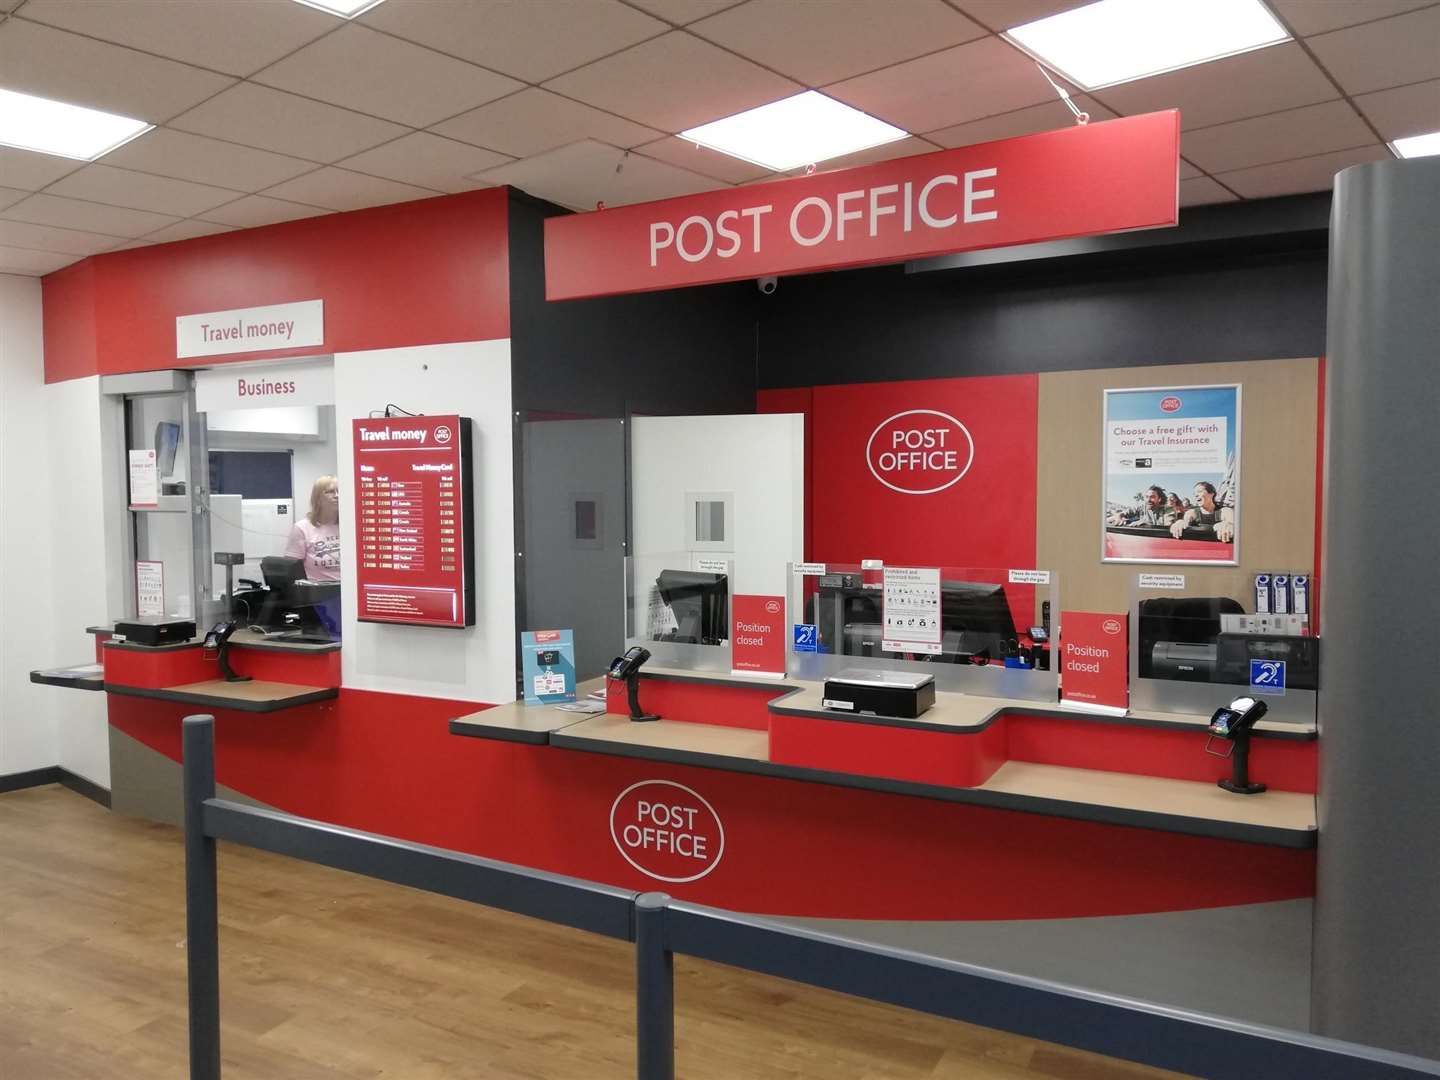 Many have come to rely on the post office to withdraw funds as banks close branches